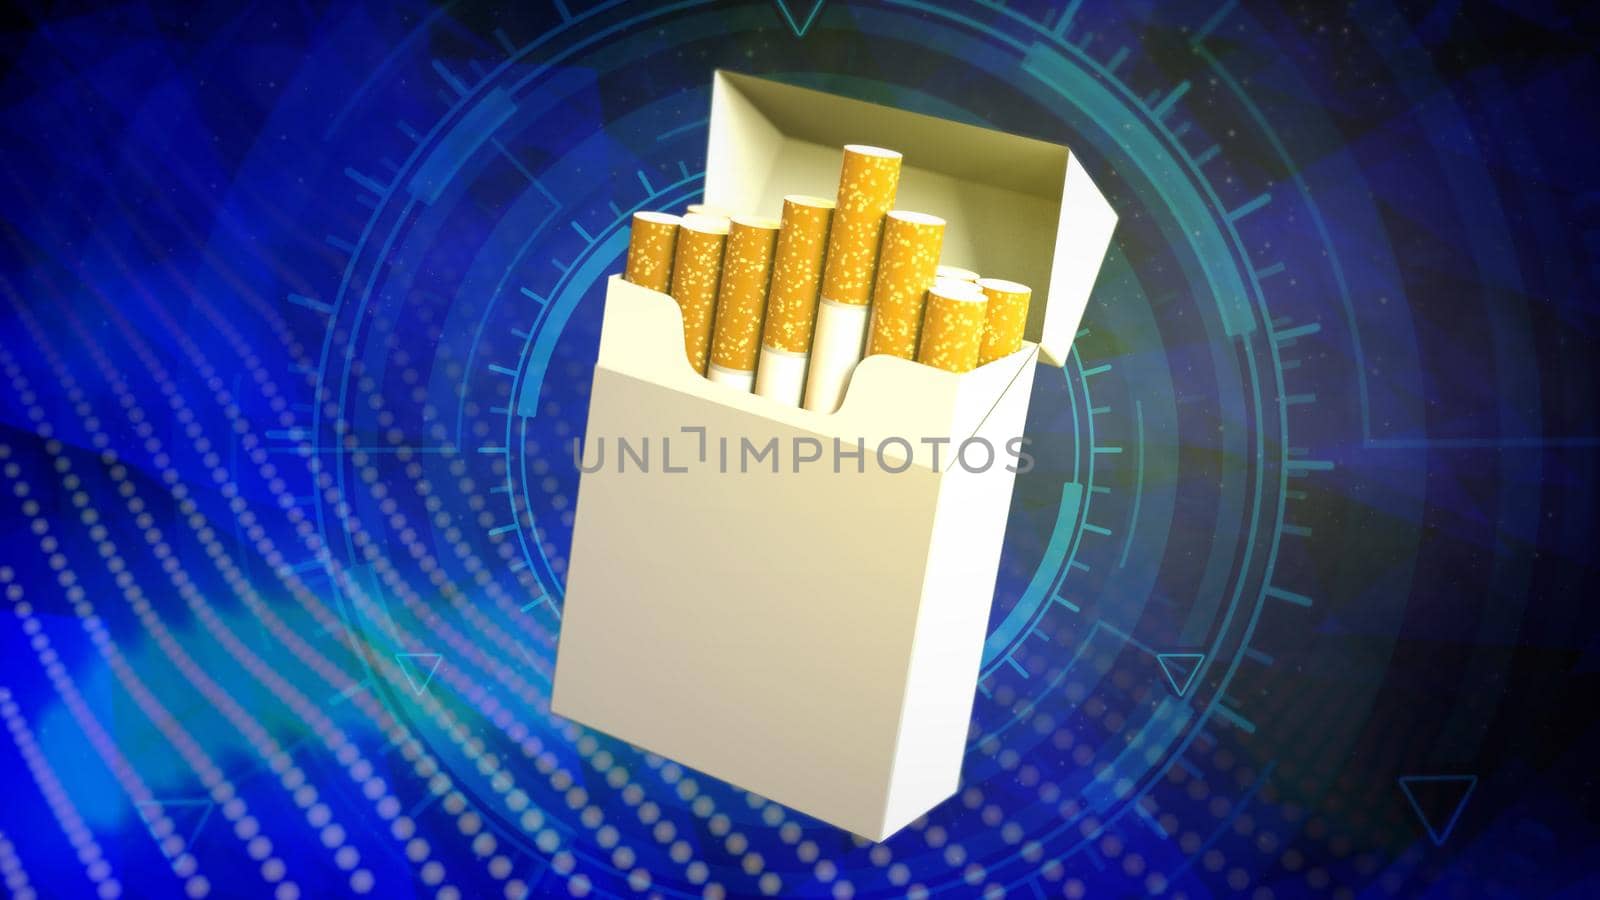 3D illustration of object - cigarette box on modern background - quit tobacco concept